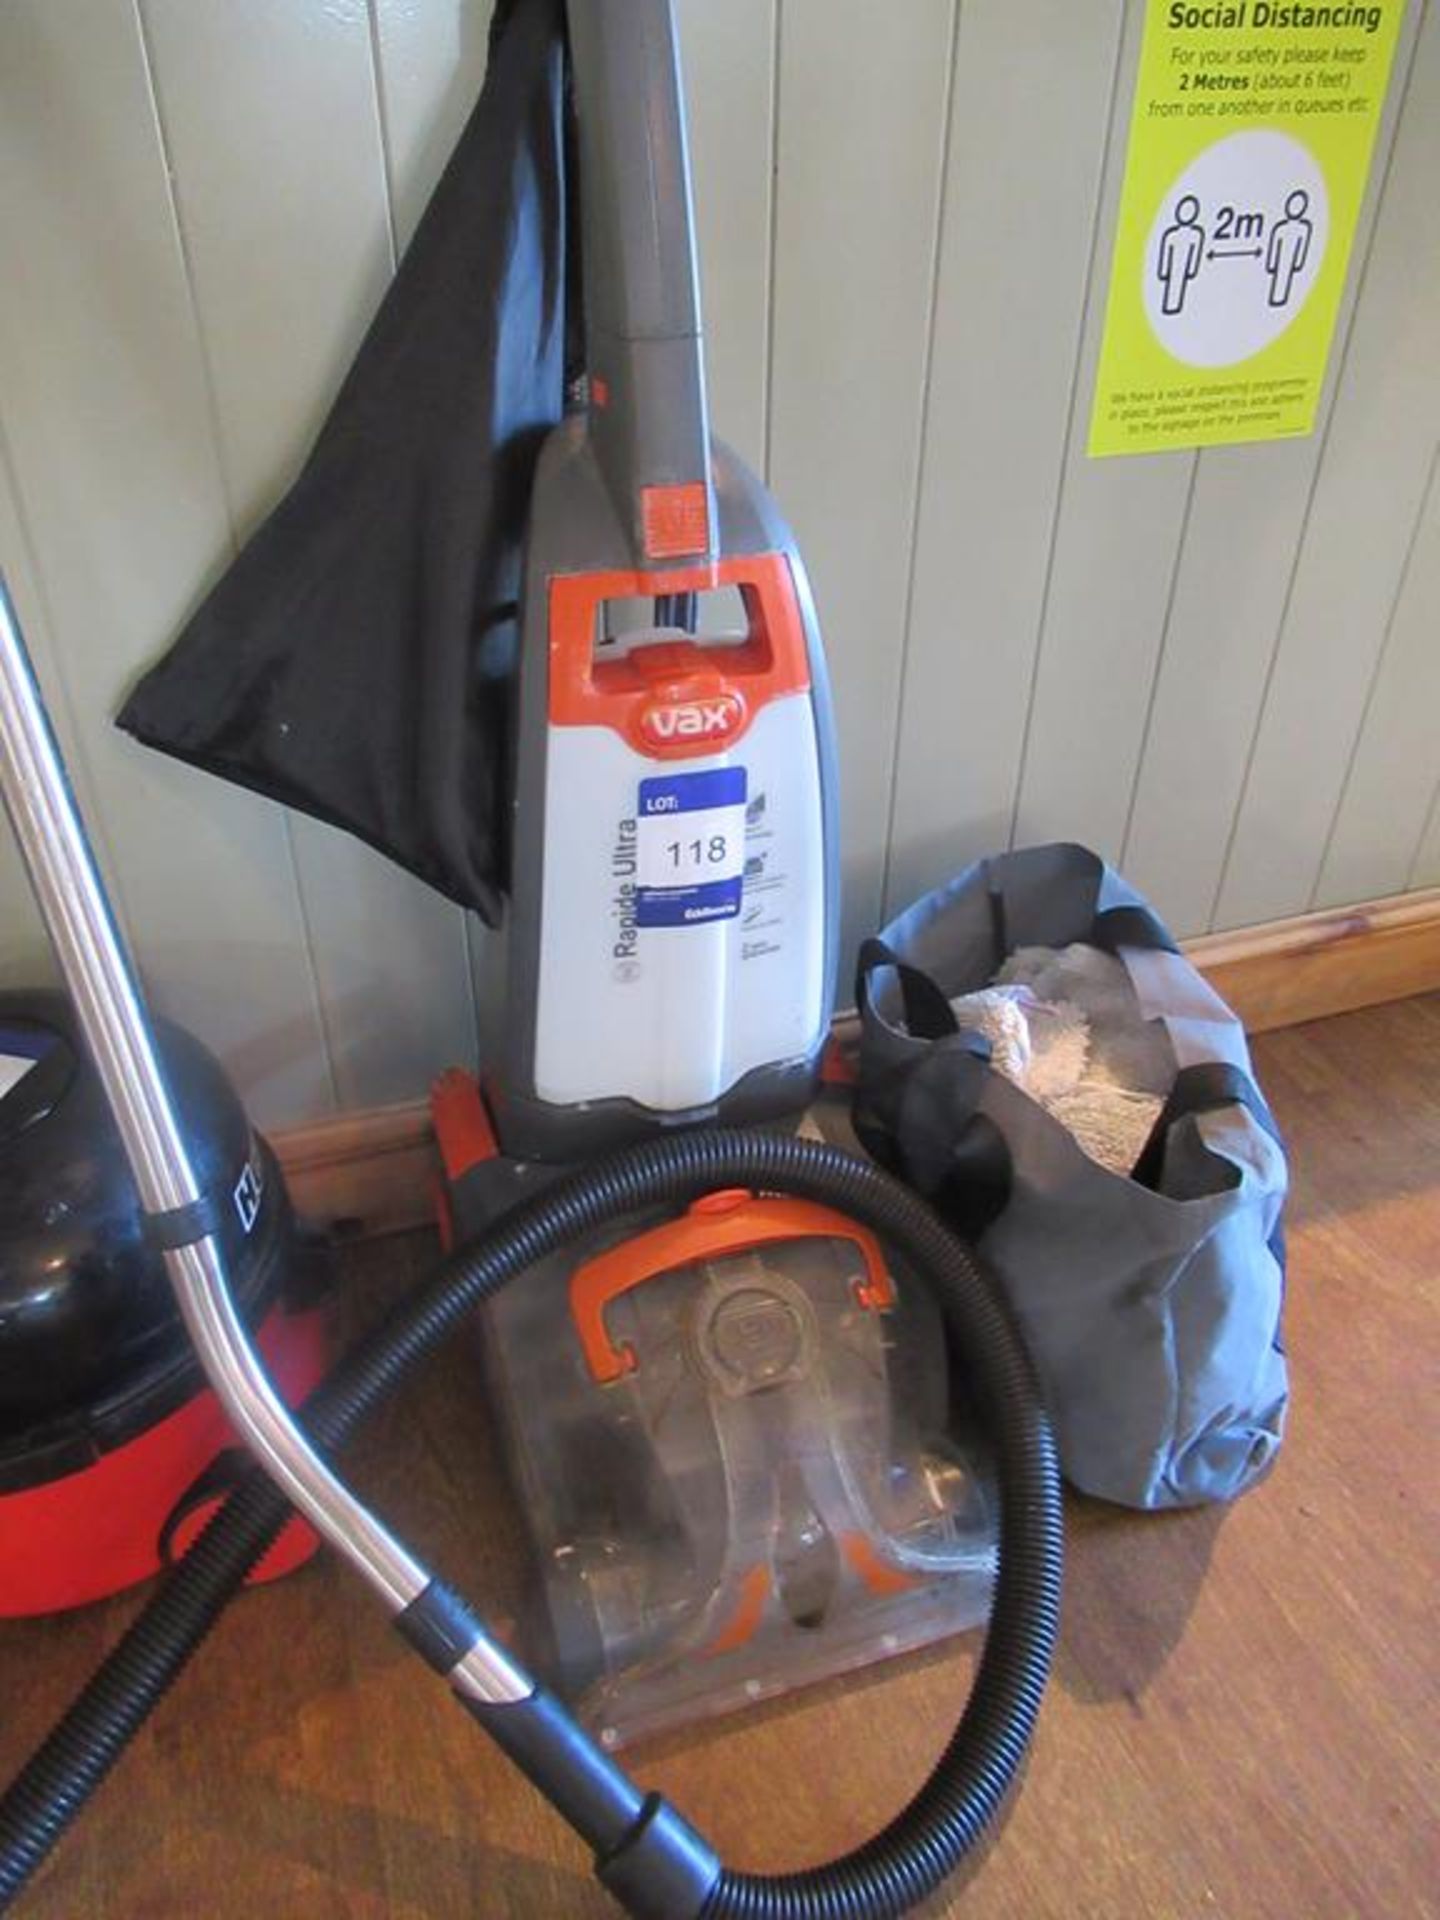 VAX Rapid Ultra Hoover, Henry Numatci Hoover and Shark Lift-Away Steam Mop - Image 3 of 4